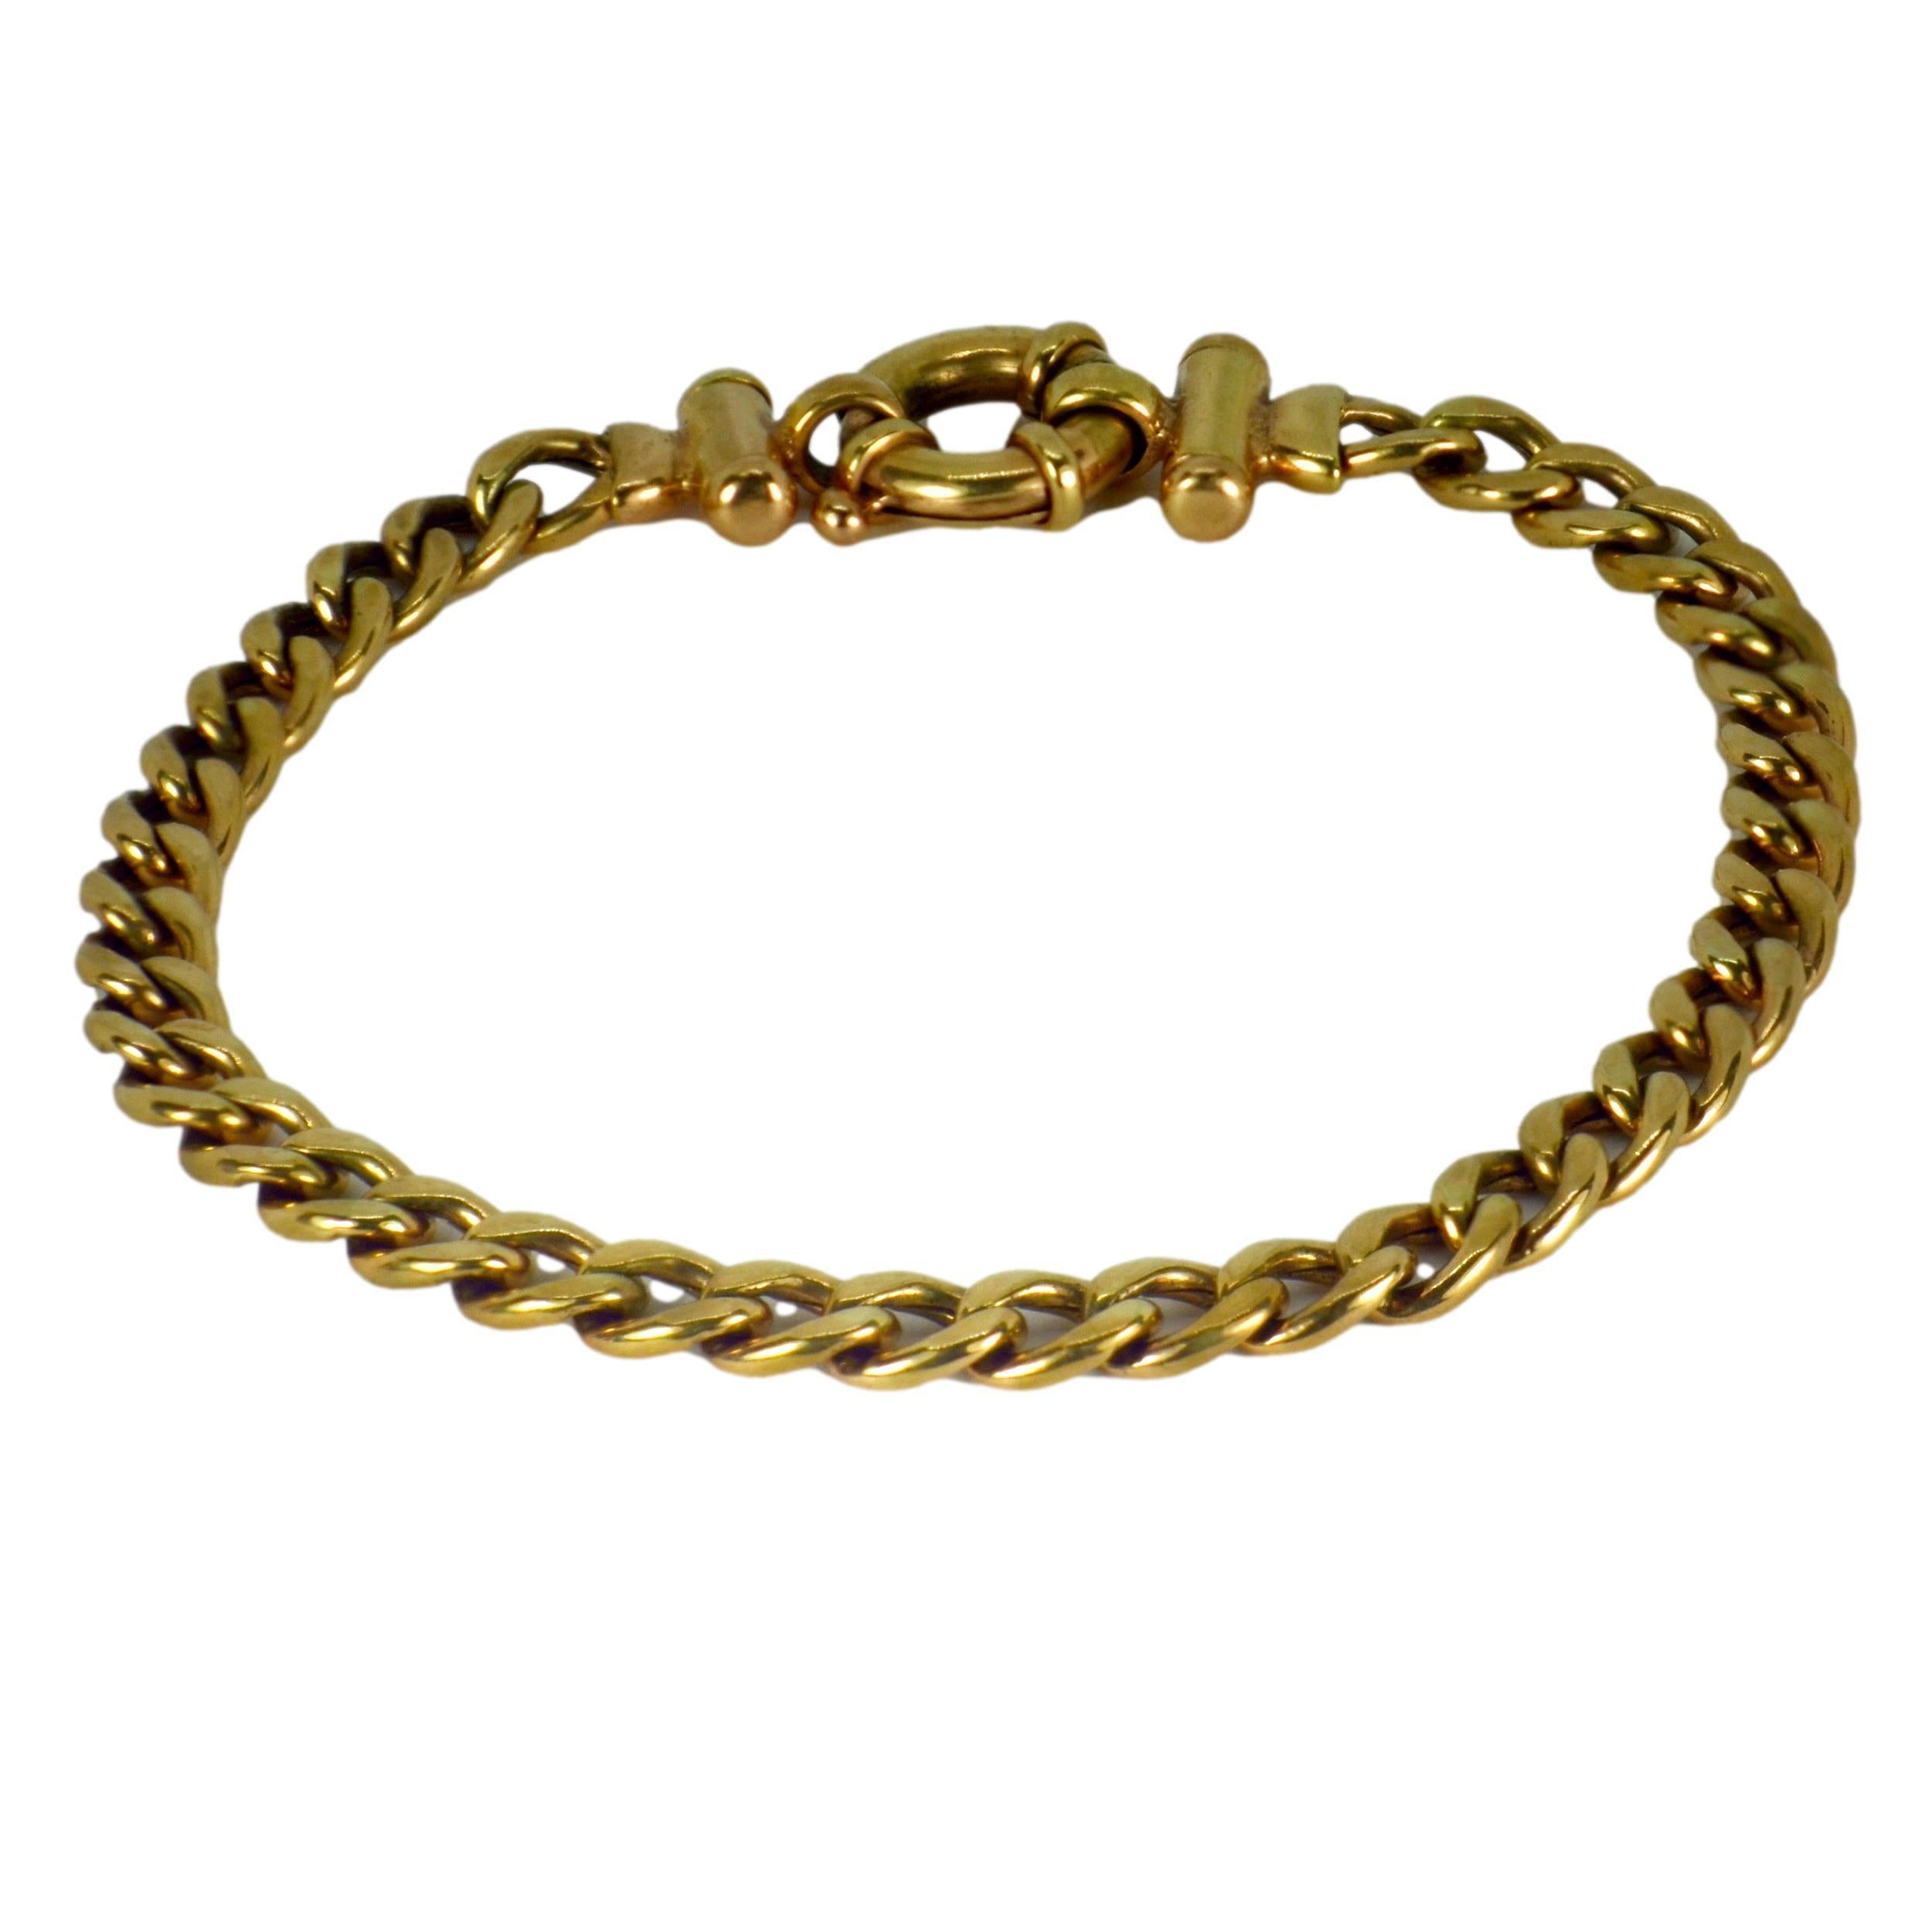 A 9 karat (9K) yellow gold link bracelet. Stamped 375 for 9 karat gold with maker’s mark IBB in a trefoil. 7.25” long.

Dimensions: 18.5 x 0.5 cm, clasp 1.2cm long.
Weight: 7.12 grams
